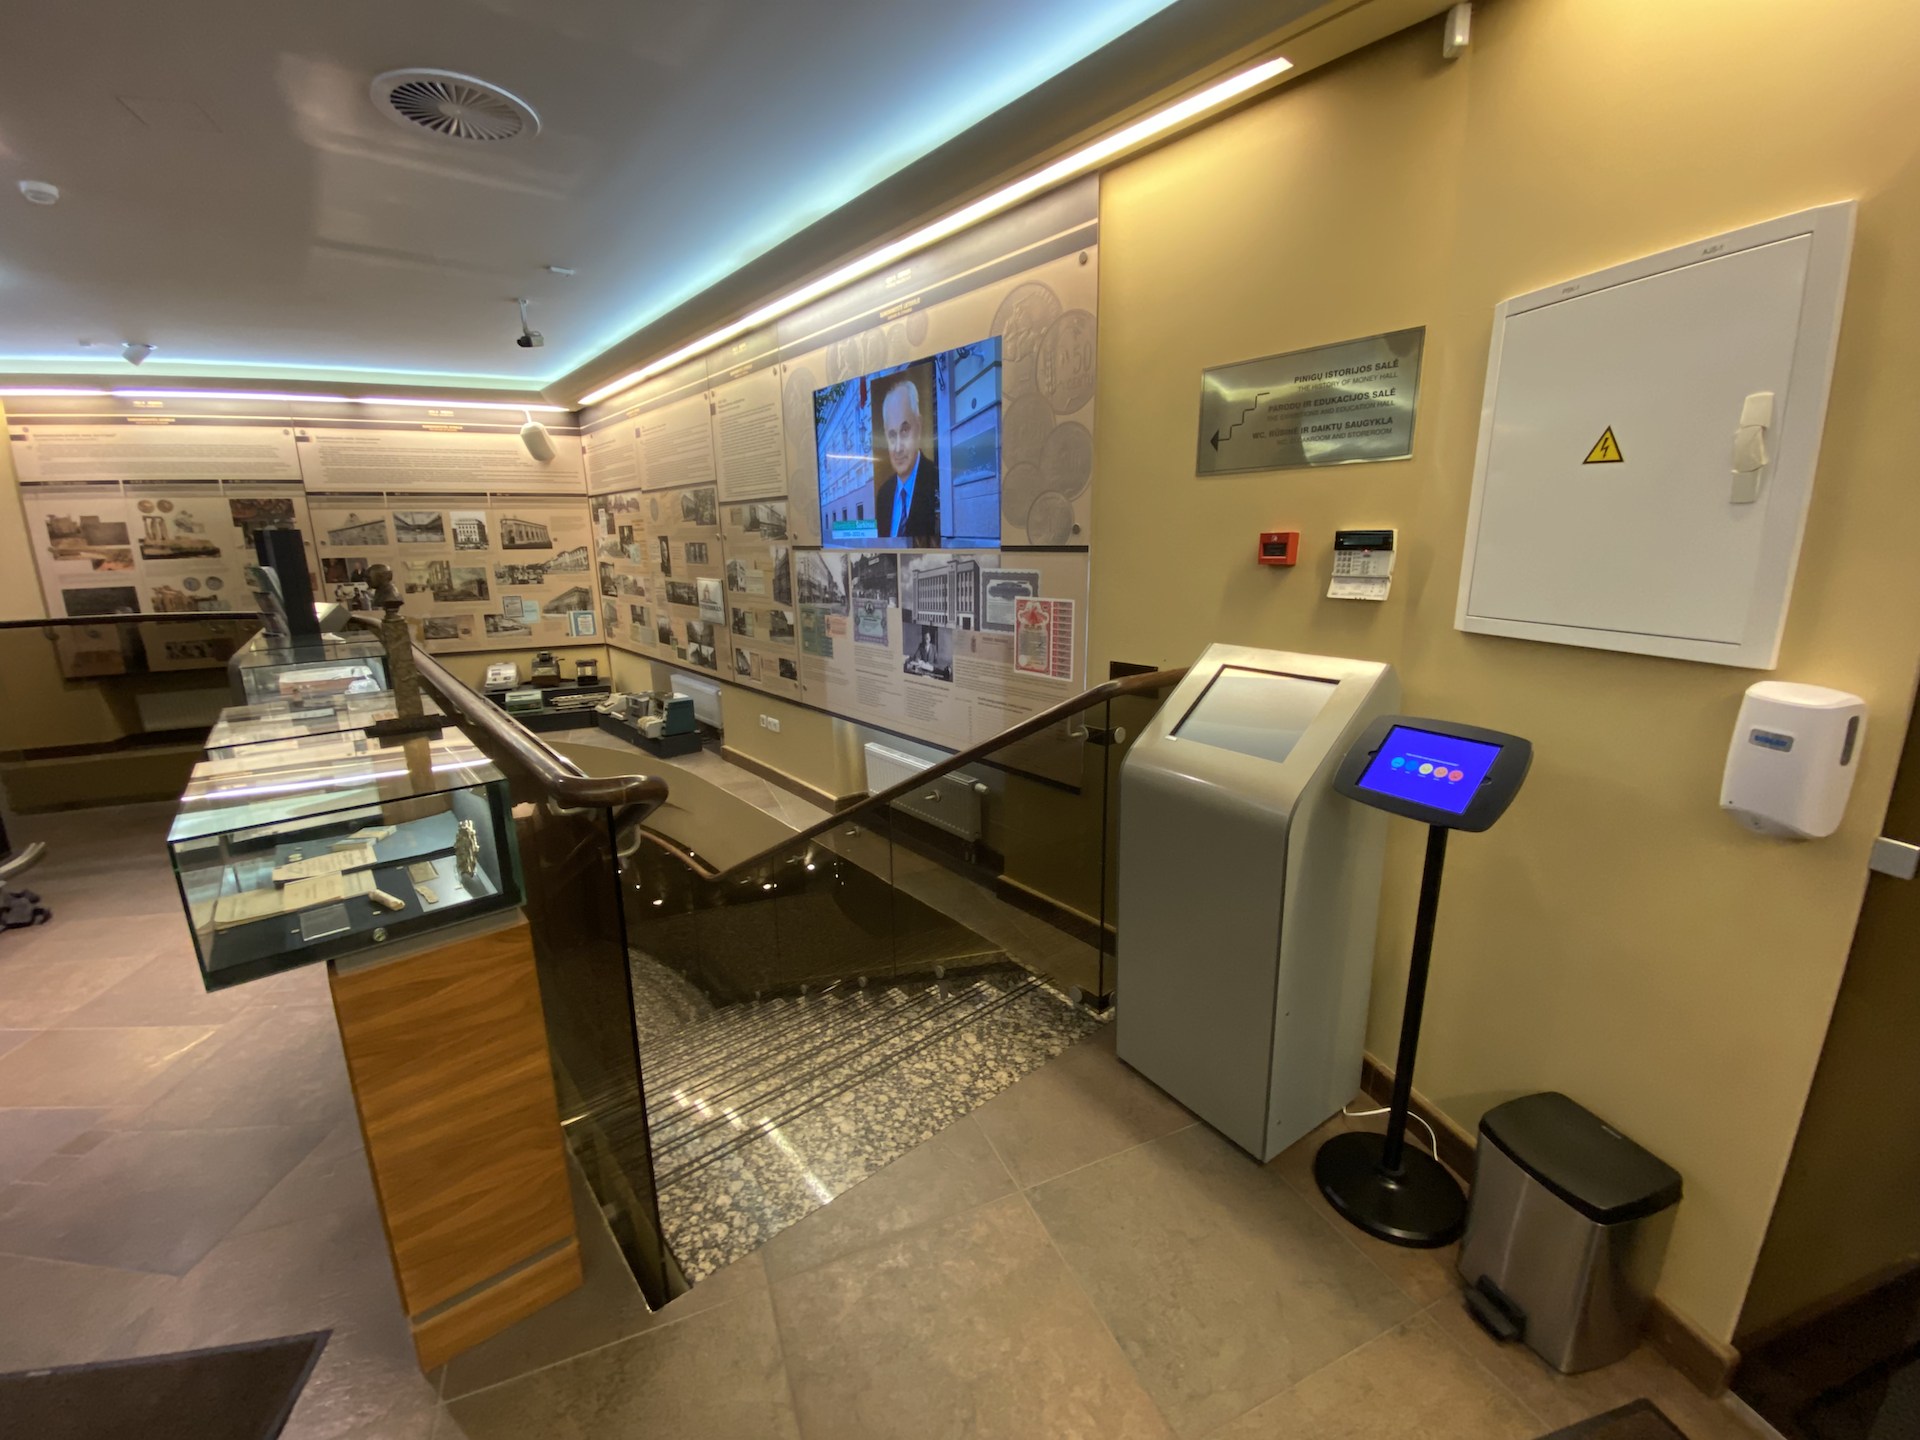 The Money Museums of the Bank of Lithuania have implemented Apexcount People Feedback customer experience survey systems